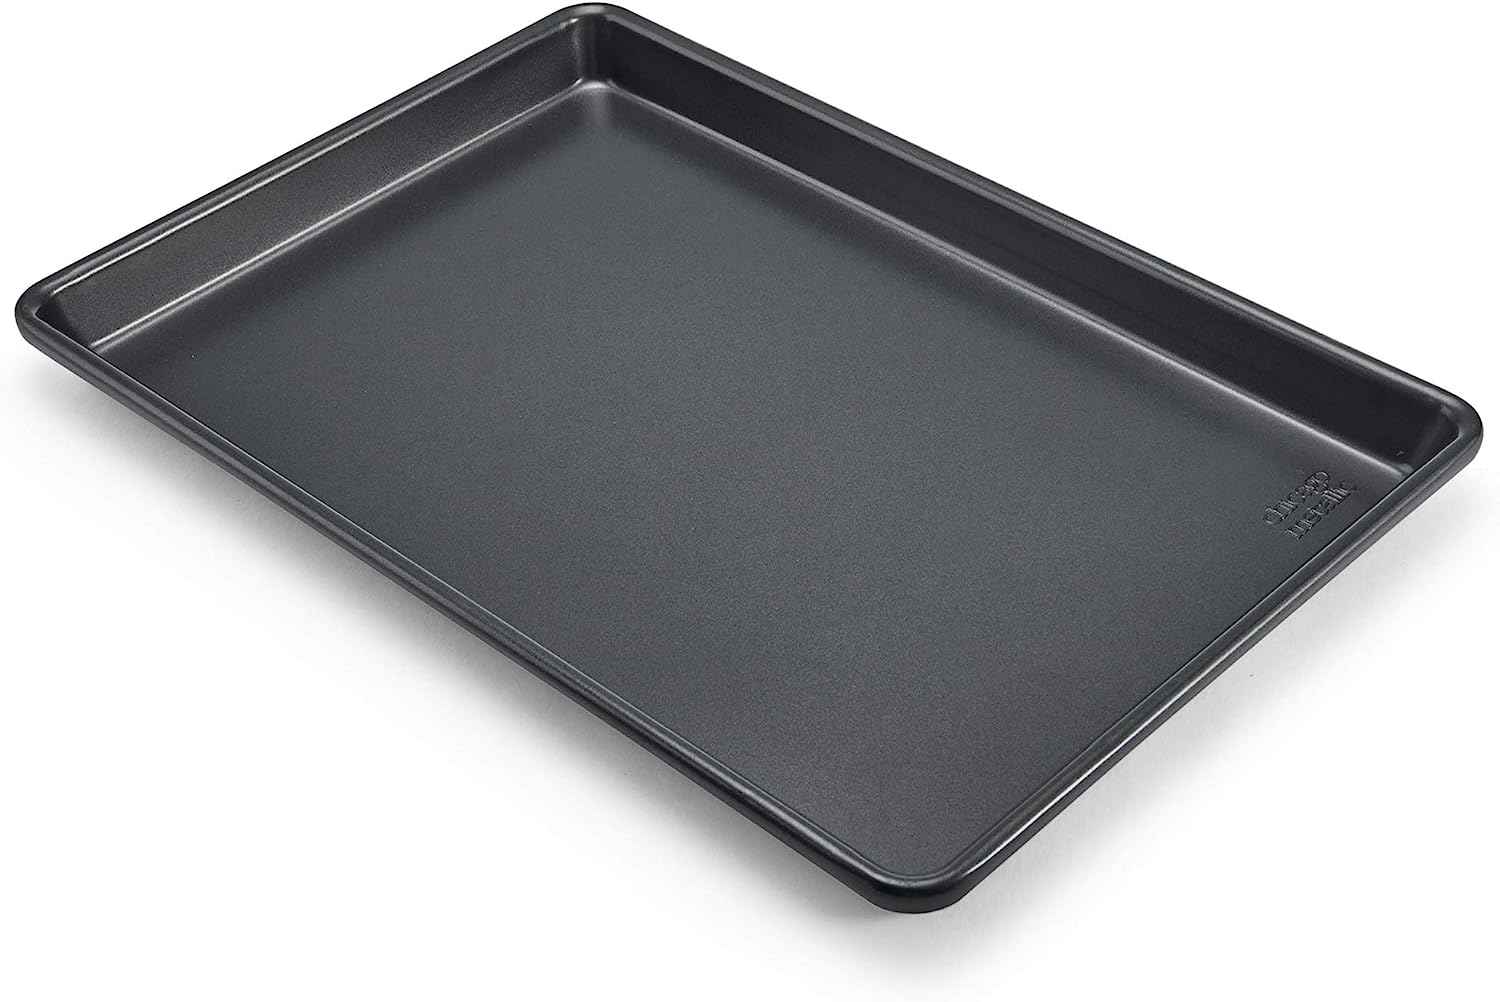 Chicago Metallic CM16150 14.75" by 9.75" Professional Non-Stick Cooking/Baking Sheet